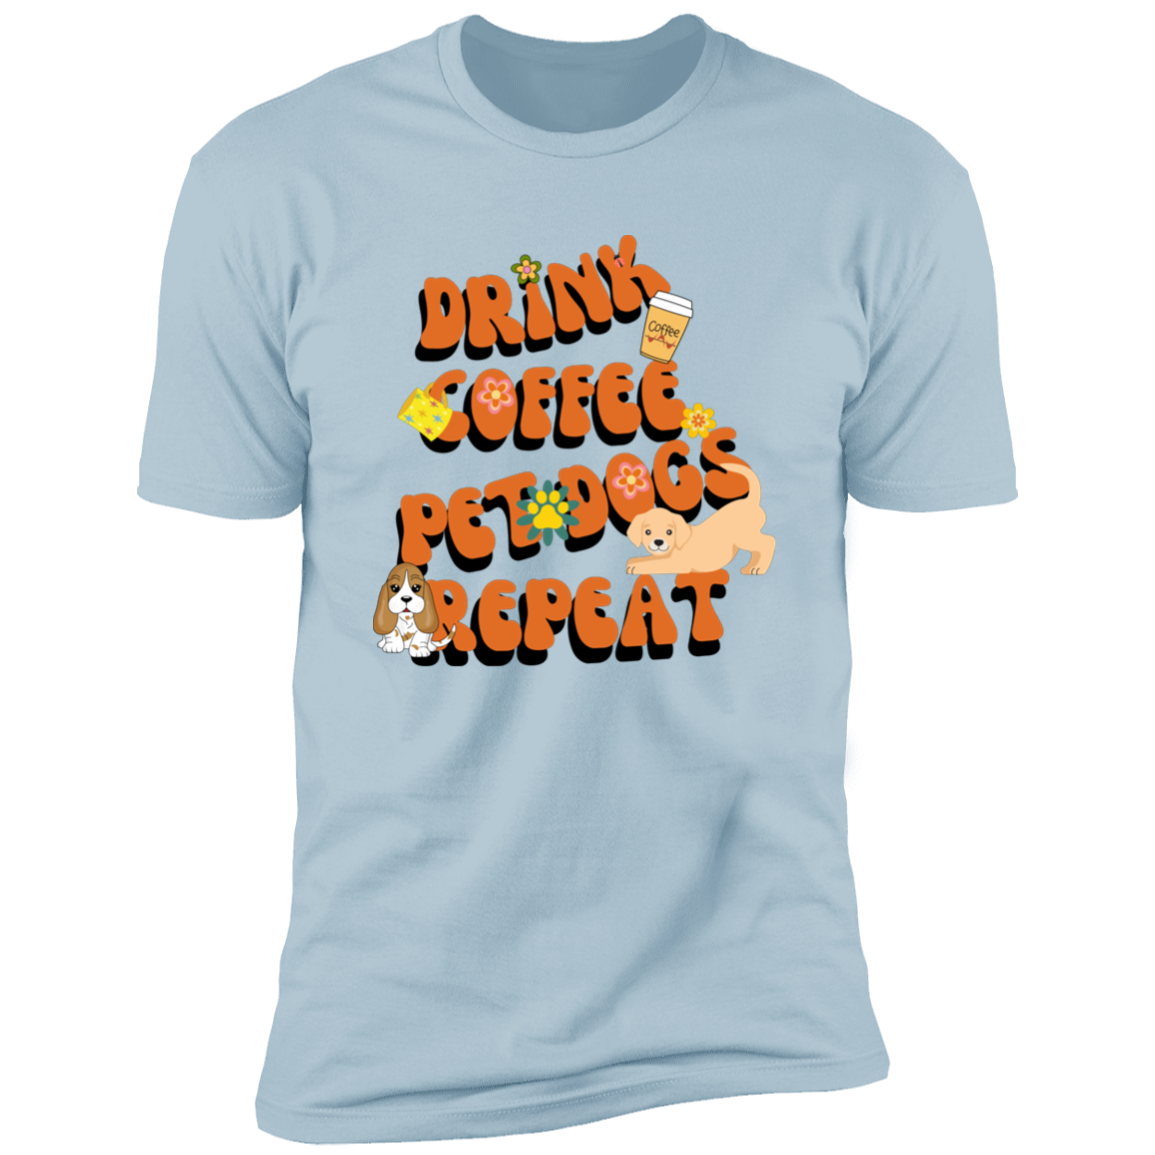 Drink Coffee Pet dogs repeat dog  Shirt, funny dog shirt for humans, dog mom and dog dad shirt, in light blue